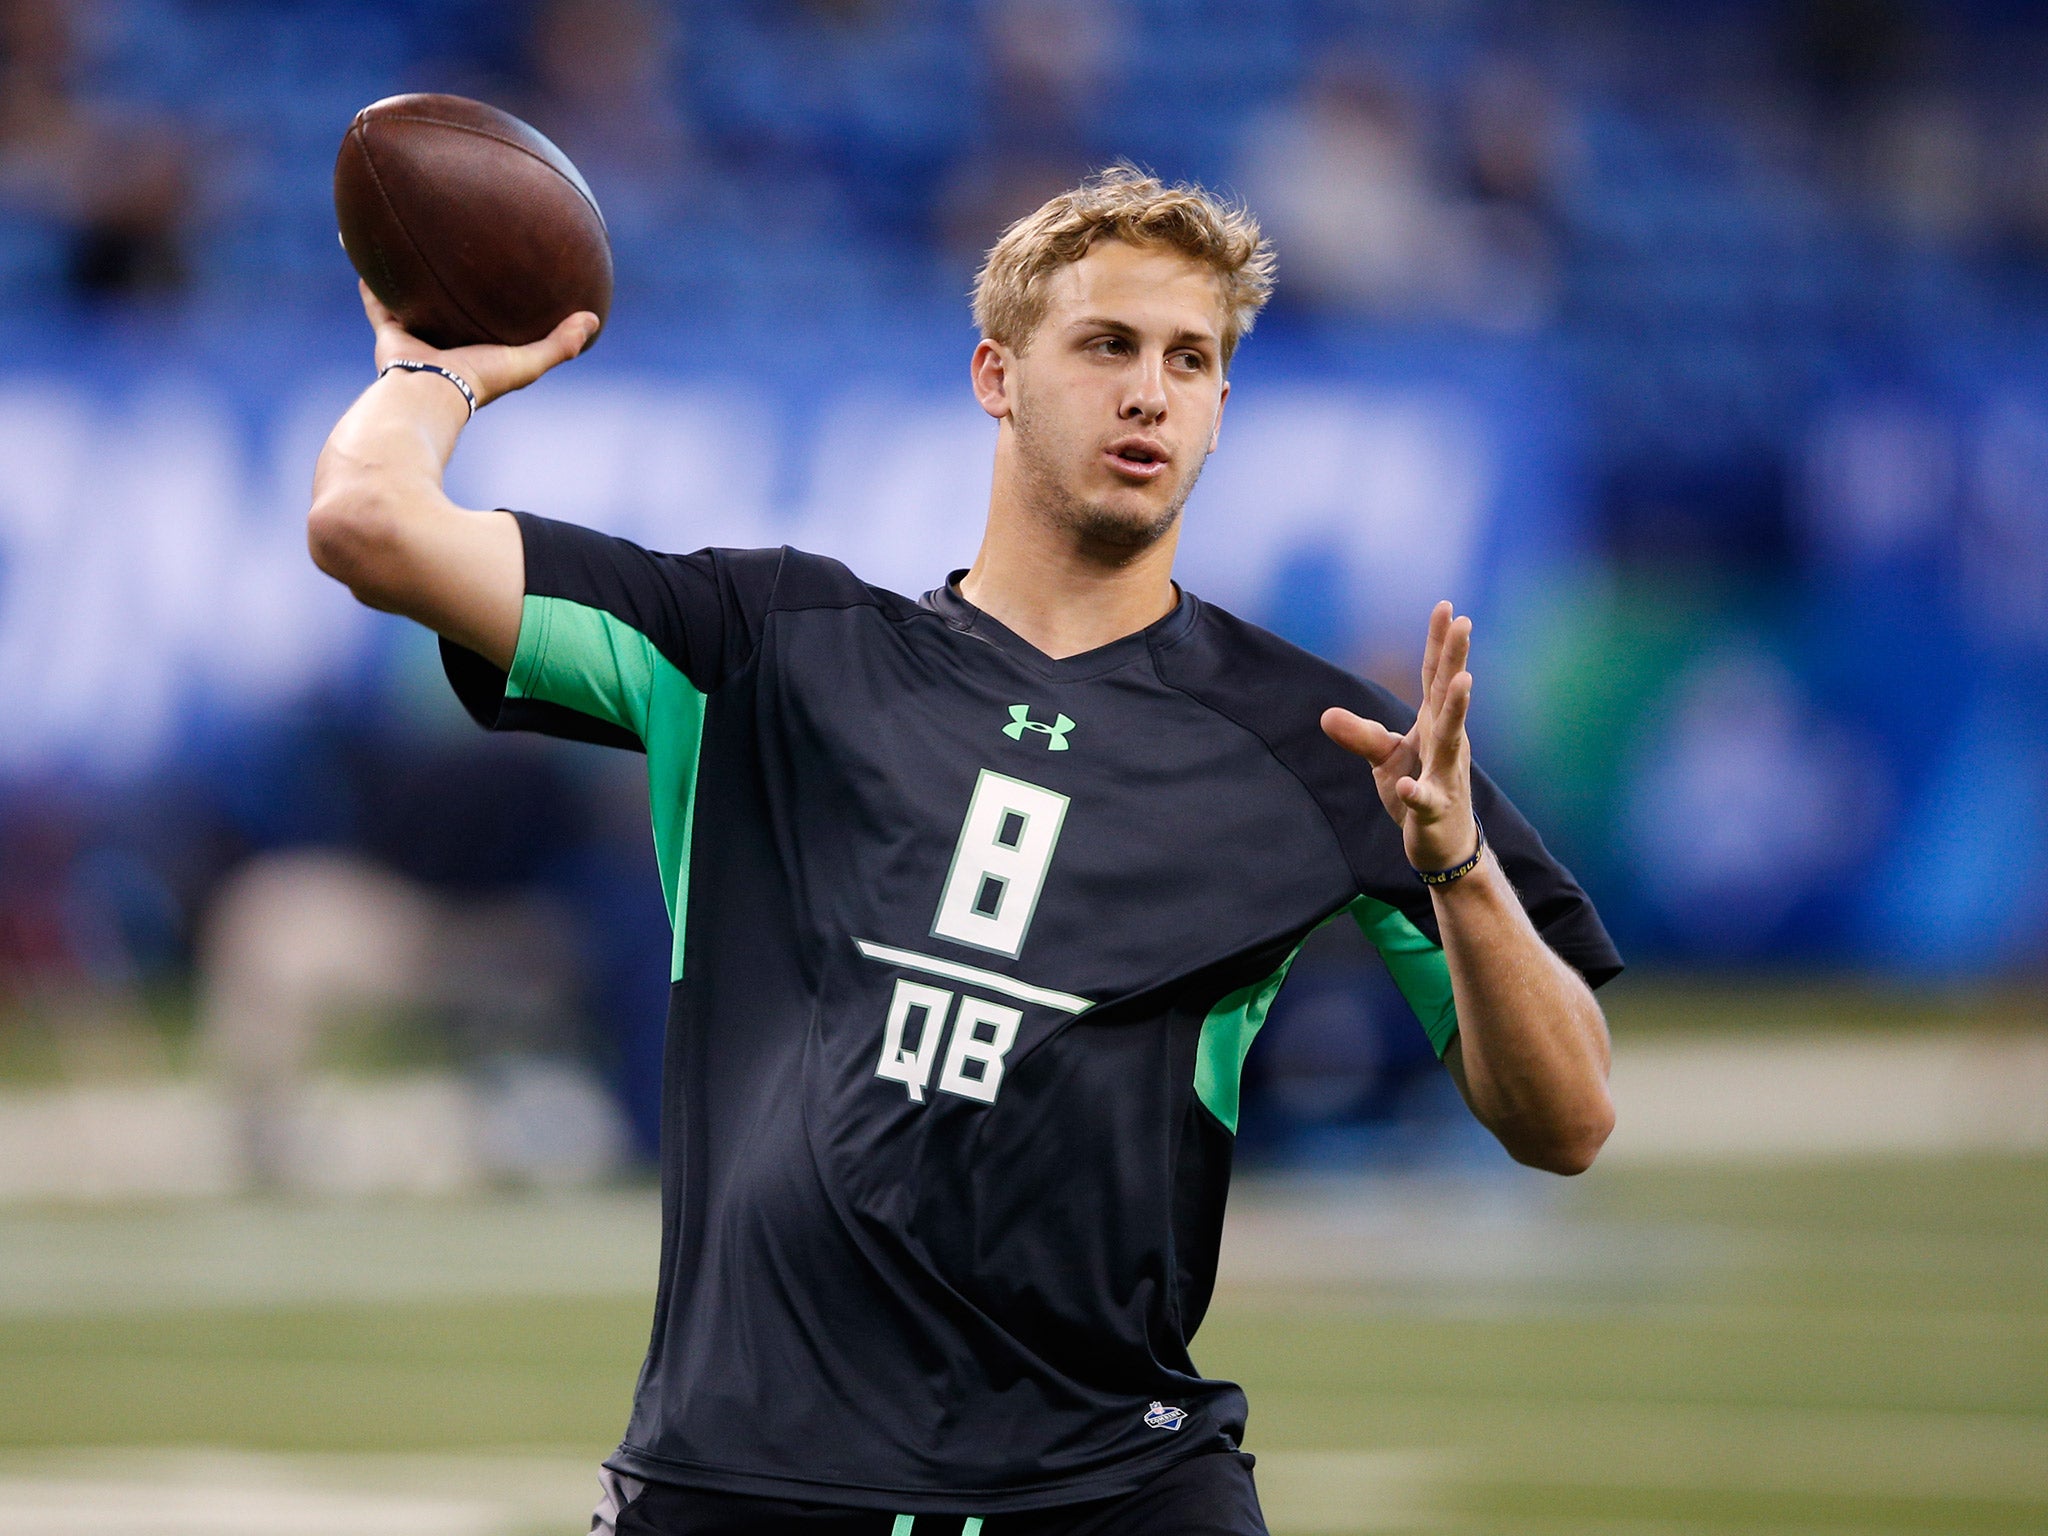 Jared Goff is expected to go as the No 1 overall draft pick